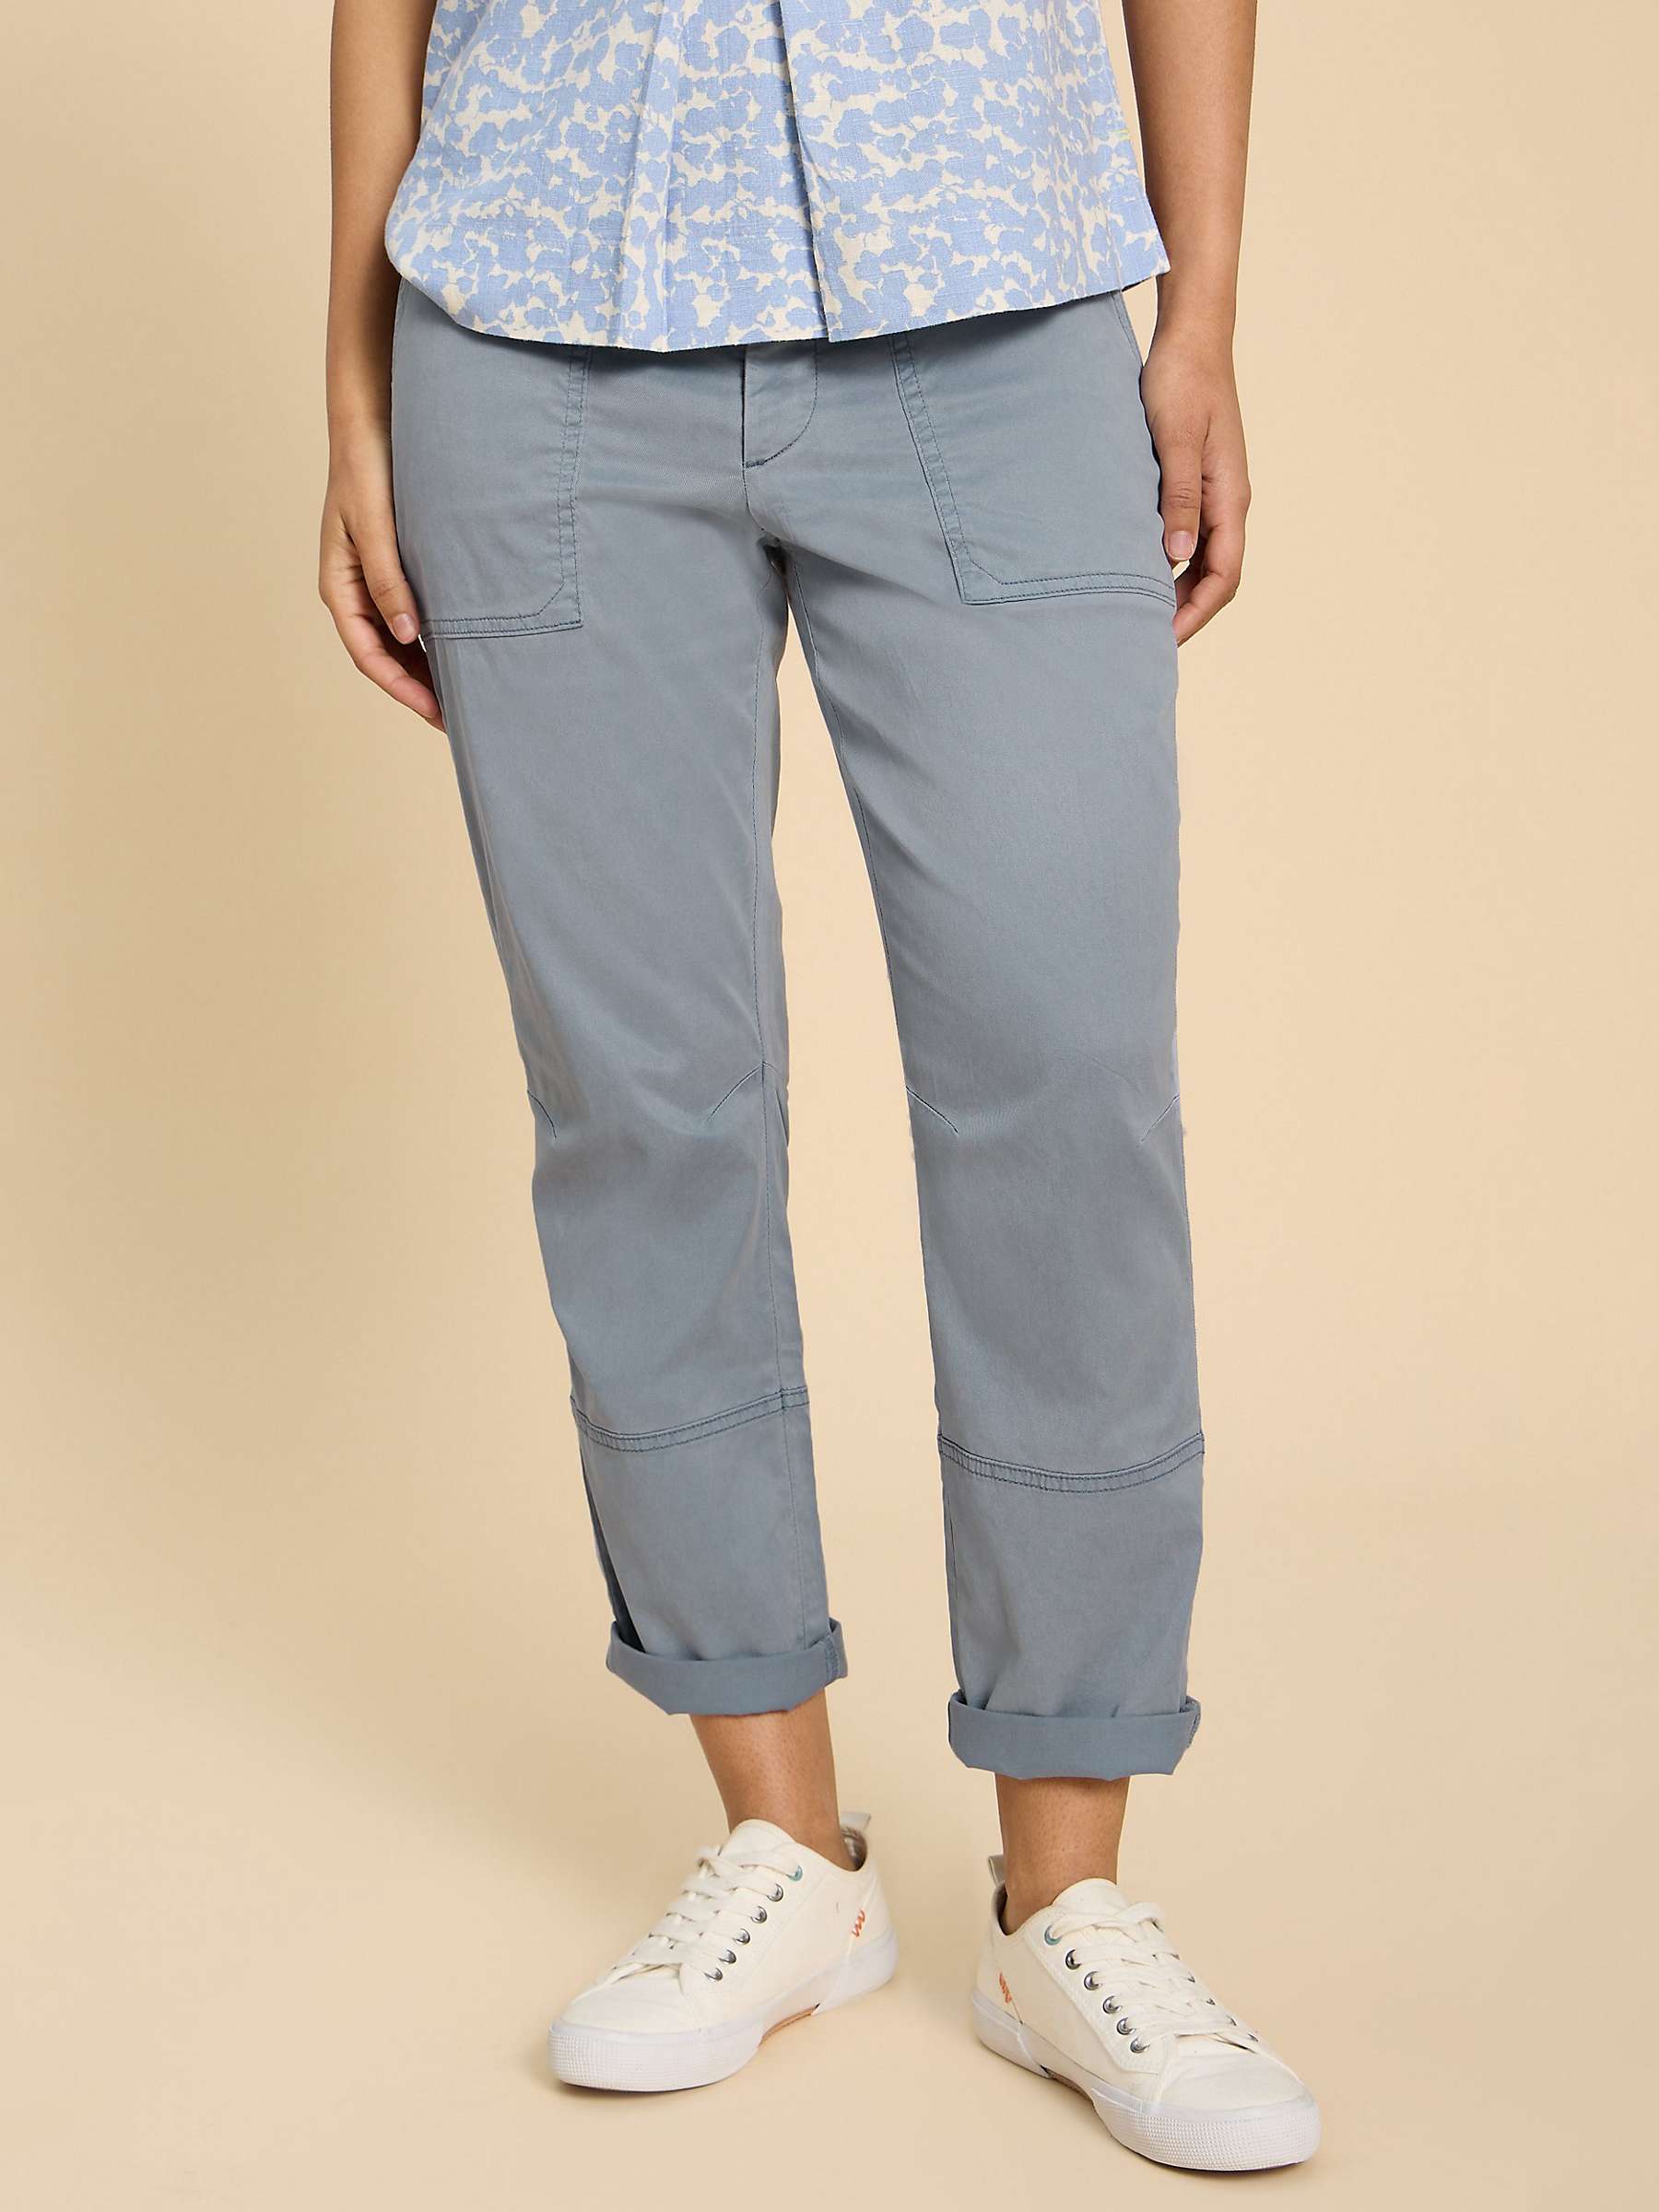 Buy White Stuff Blaire Trousers Online at johnlewis.com